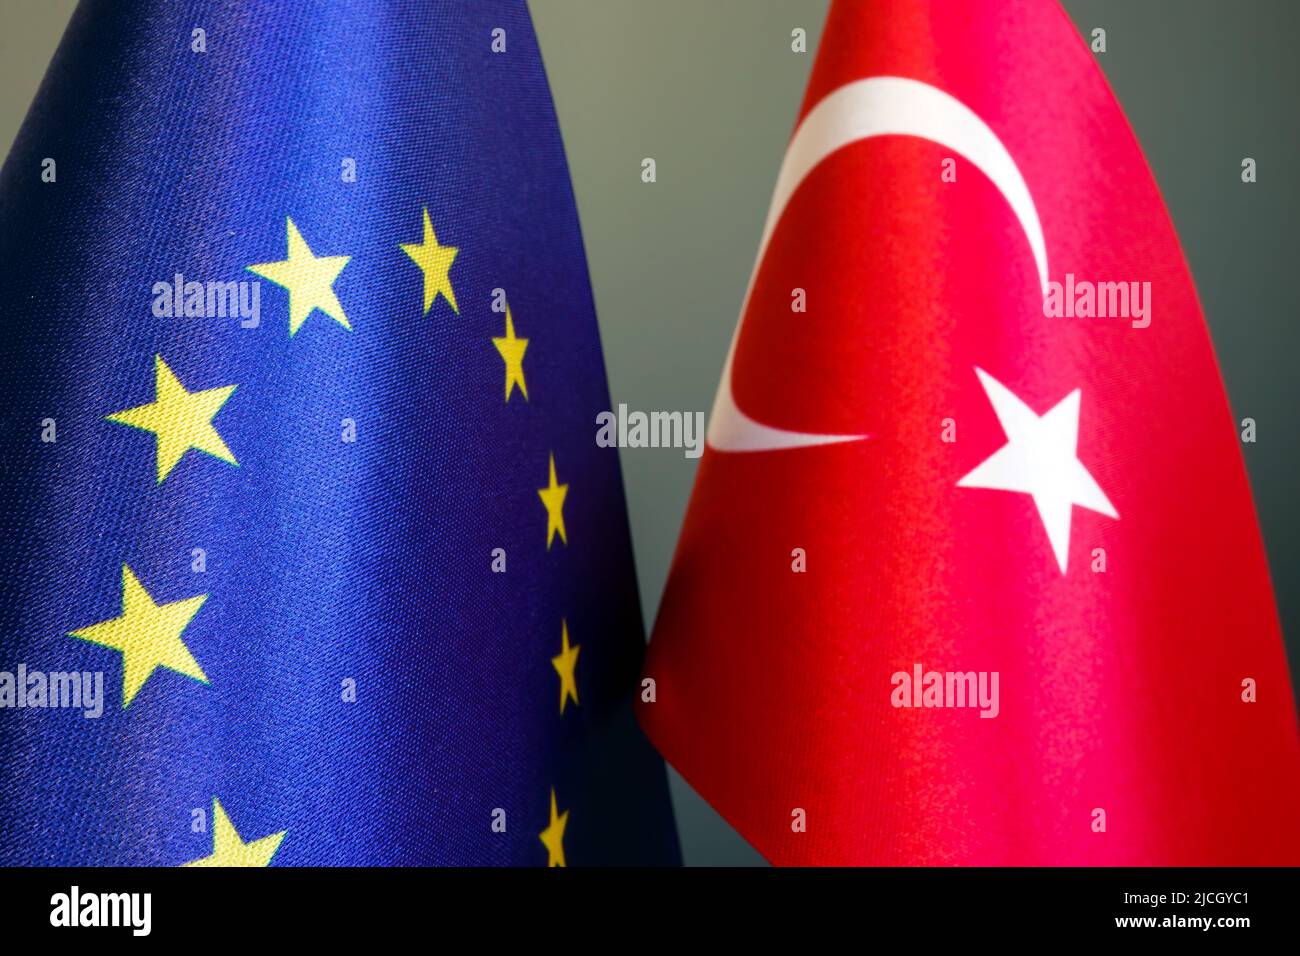 Flags of the EU and Turkey as a symbol of political relations. Stock Photo